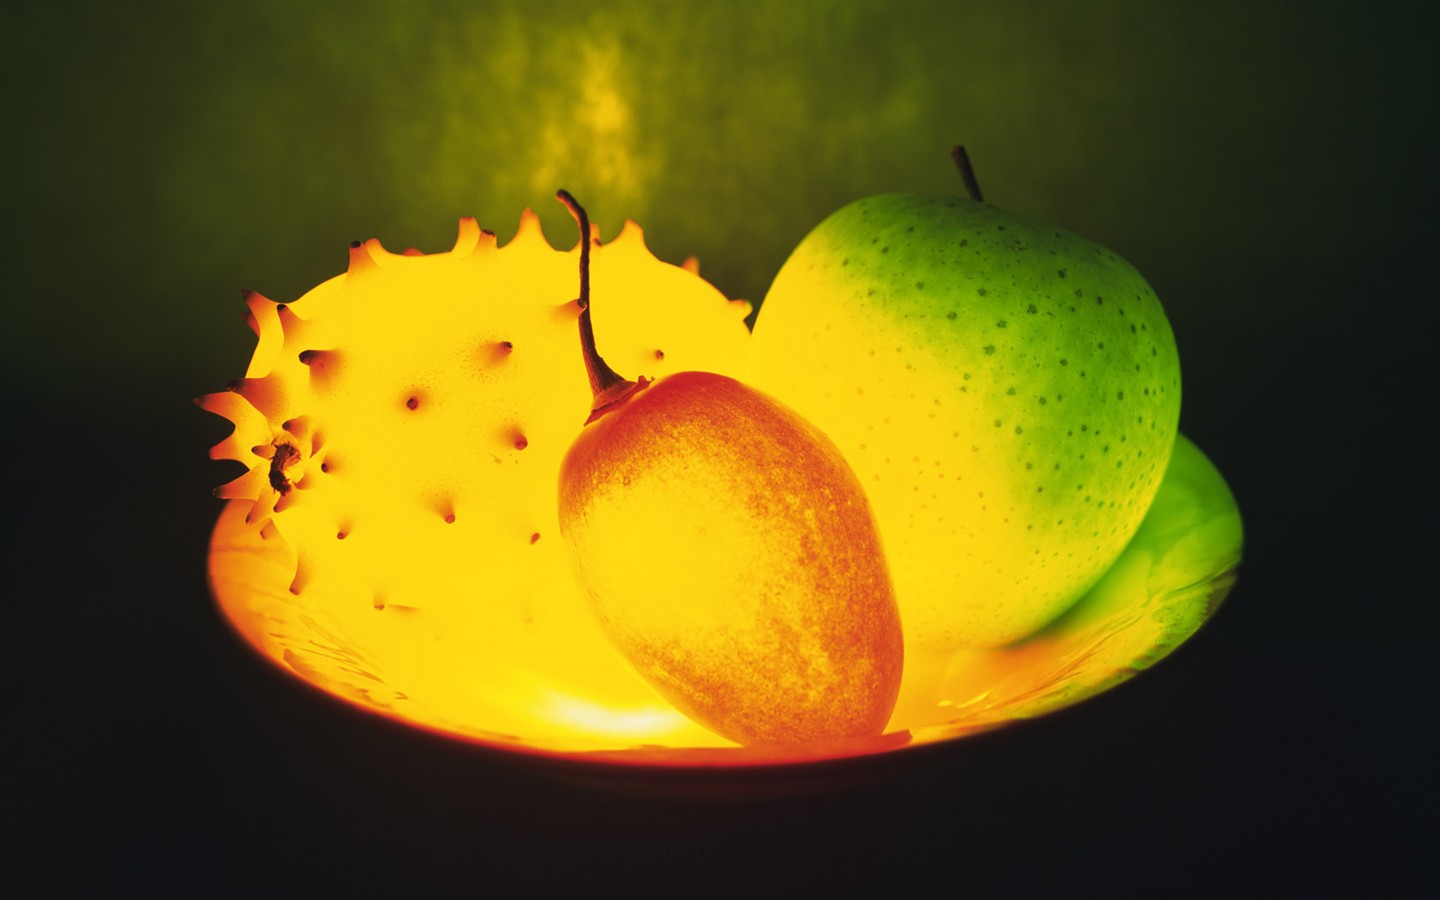 Light Obst Feature (1) #13 - 1440x900